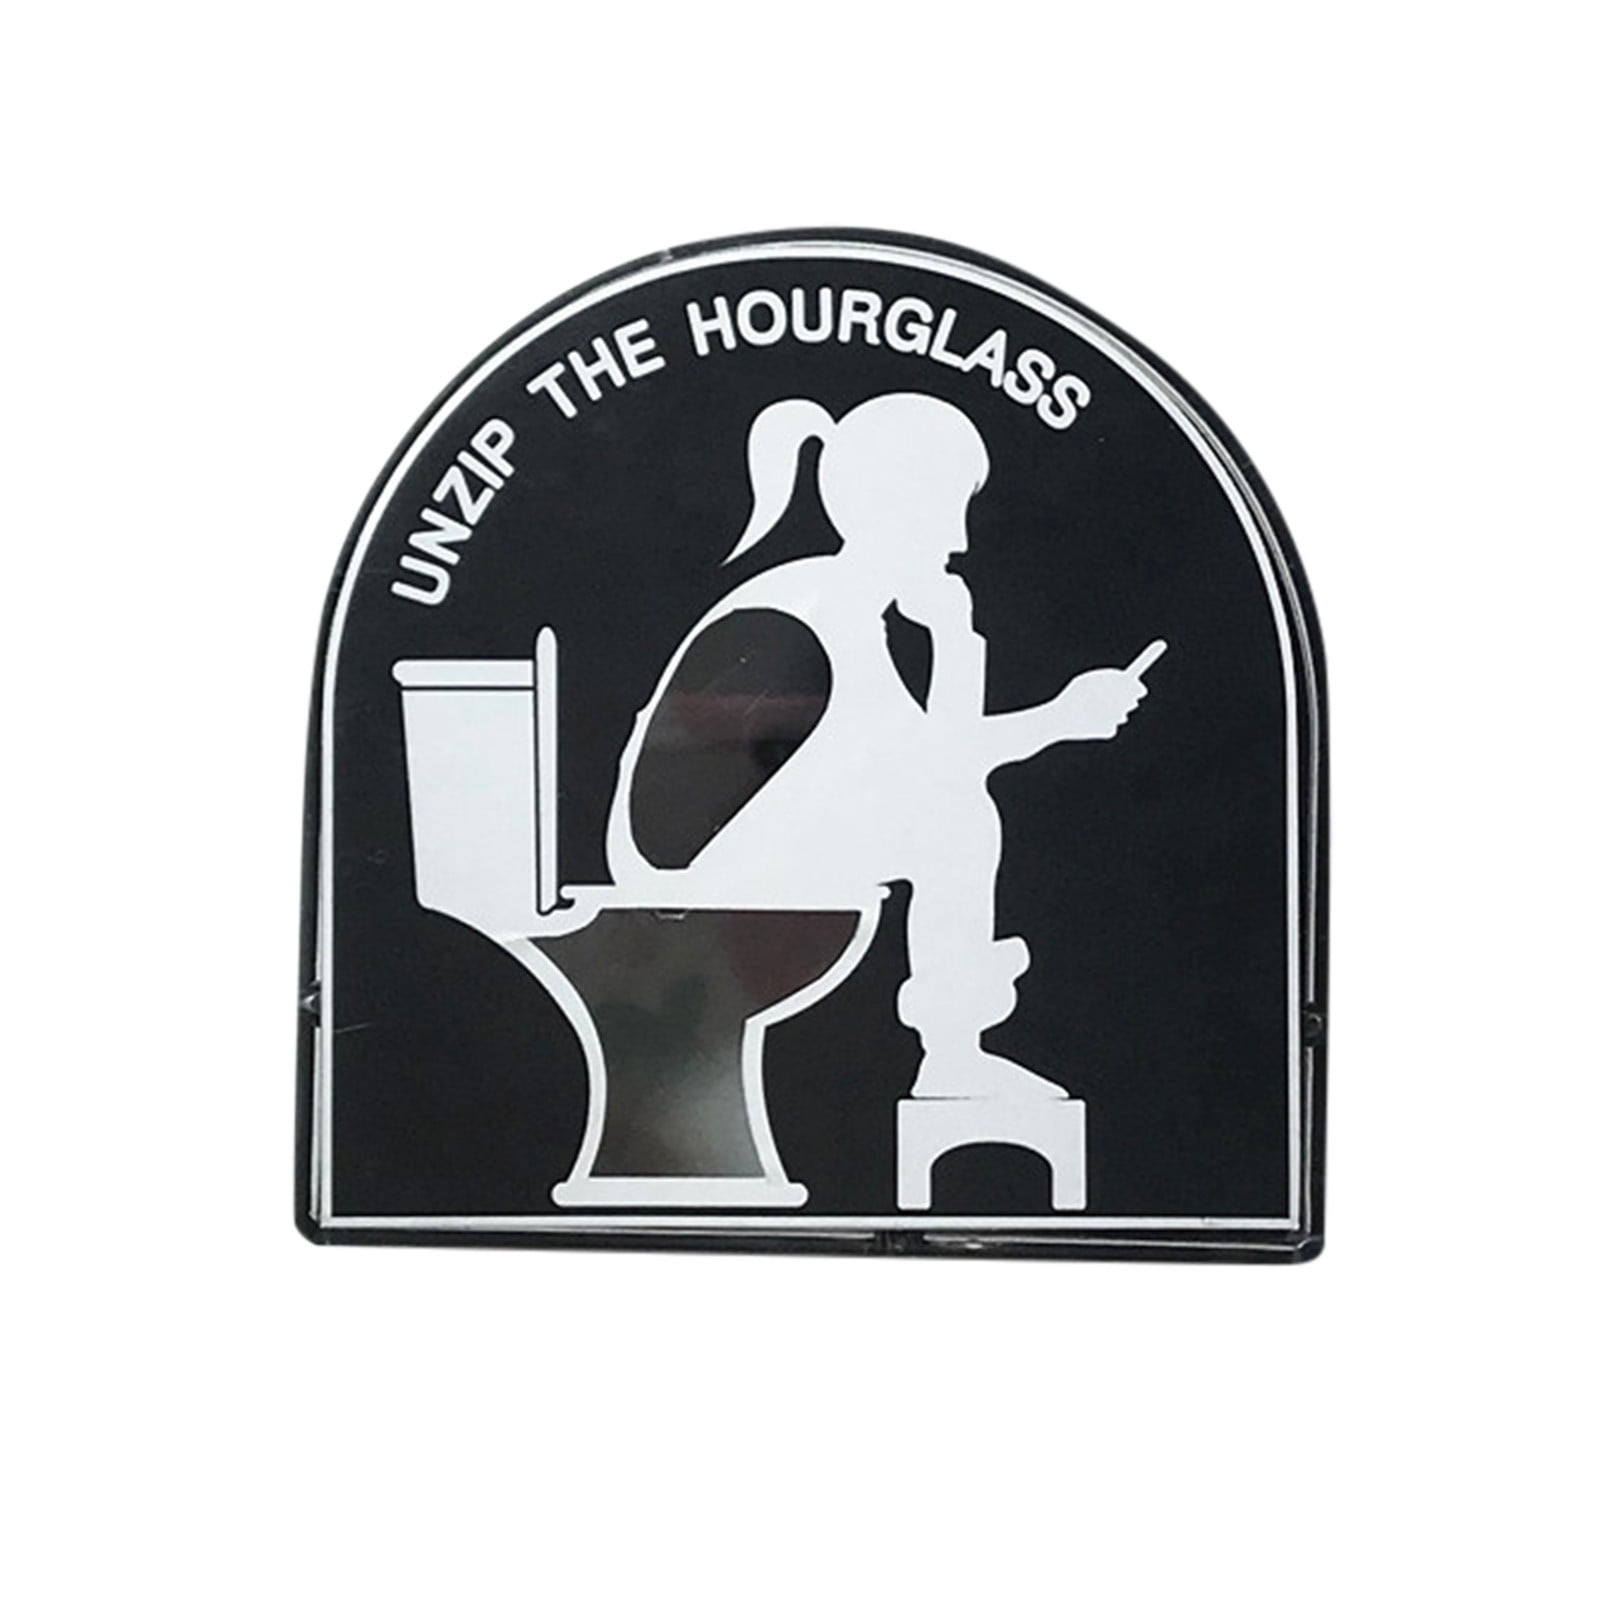 A Toilet Timer Time Hourglass Decoration Home Hourglass Decoration